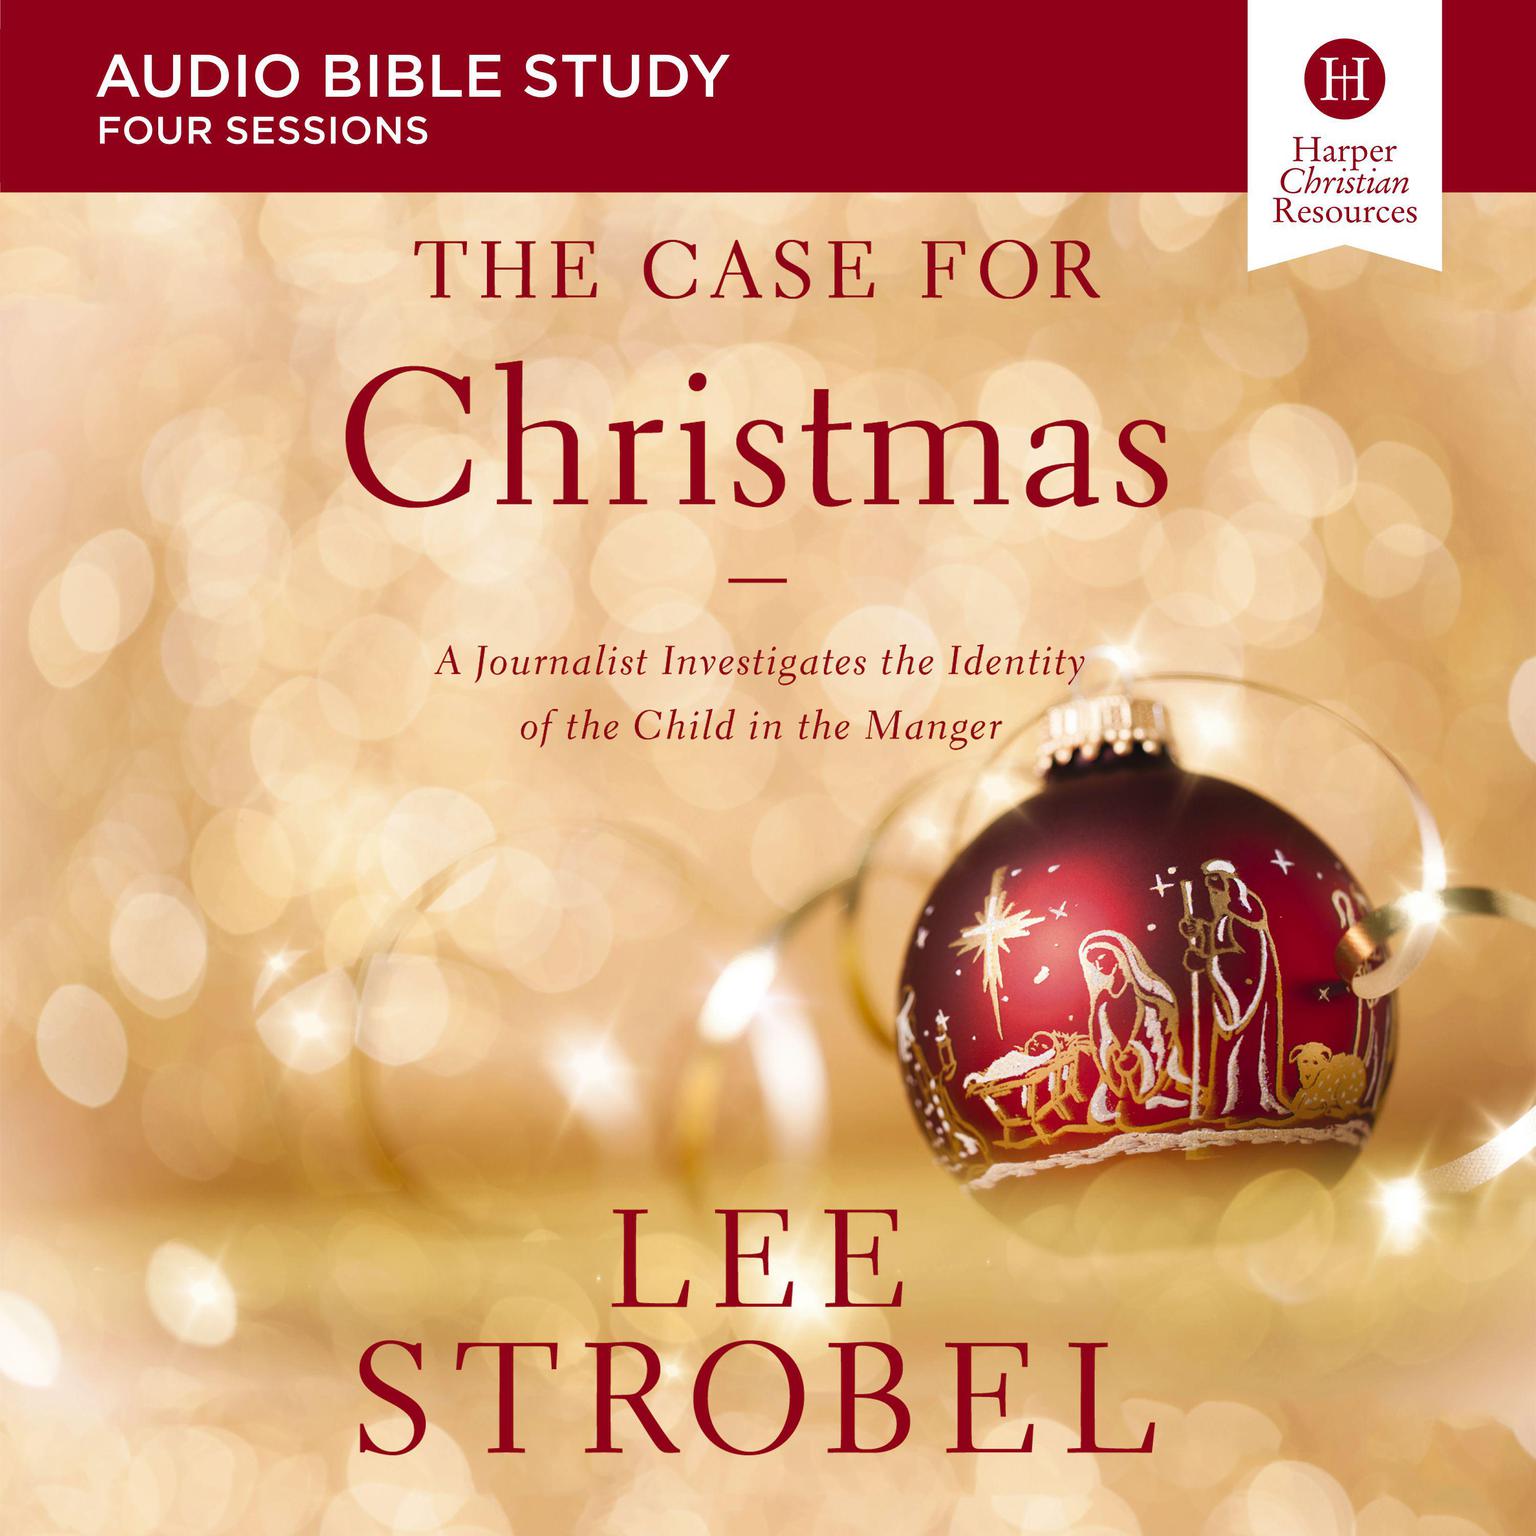 The Case for Christmas: Audio Bible Studies Audiobook, by Lee Strobel